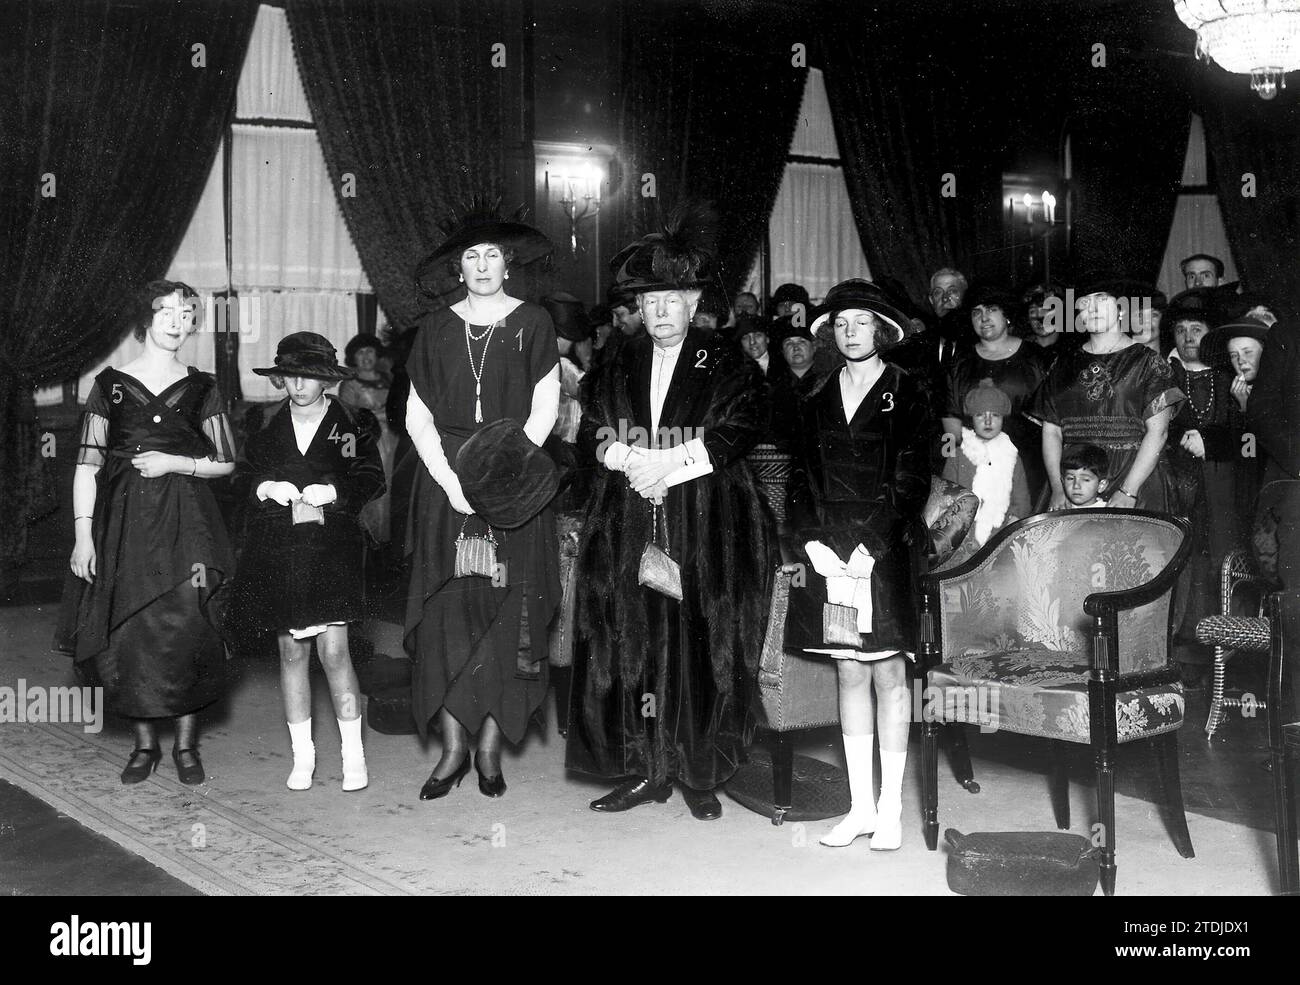 03/16/1921. Madrid. In the Party Room of the Palace Hotel. HM Queen Victoria Eugenia (1), and Hs.Aa. the Infantas Doña Isabel (2) and Doña Beatriz (3) and Doña Cristina (4), with the eminent pianist Carolina Peczenik (5), after the interesting concert given by Esta. Credit: Album / Archivo ABC / Julio Duque Stock Photo